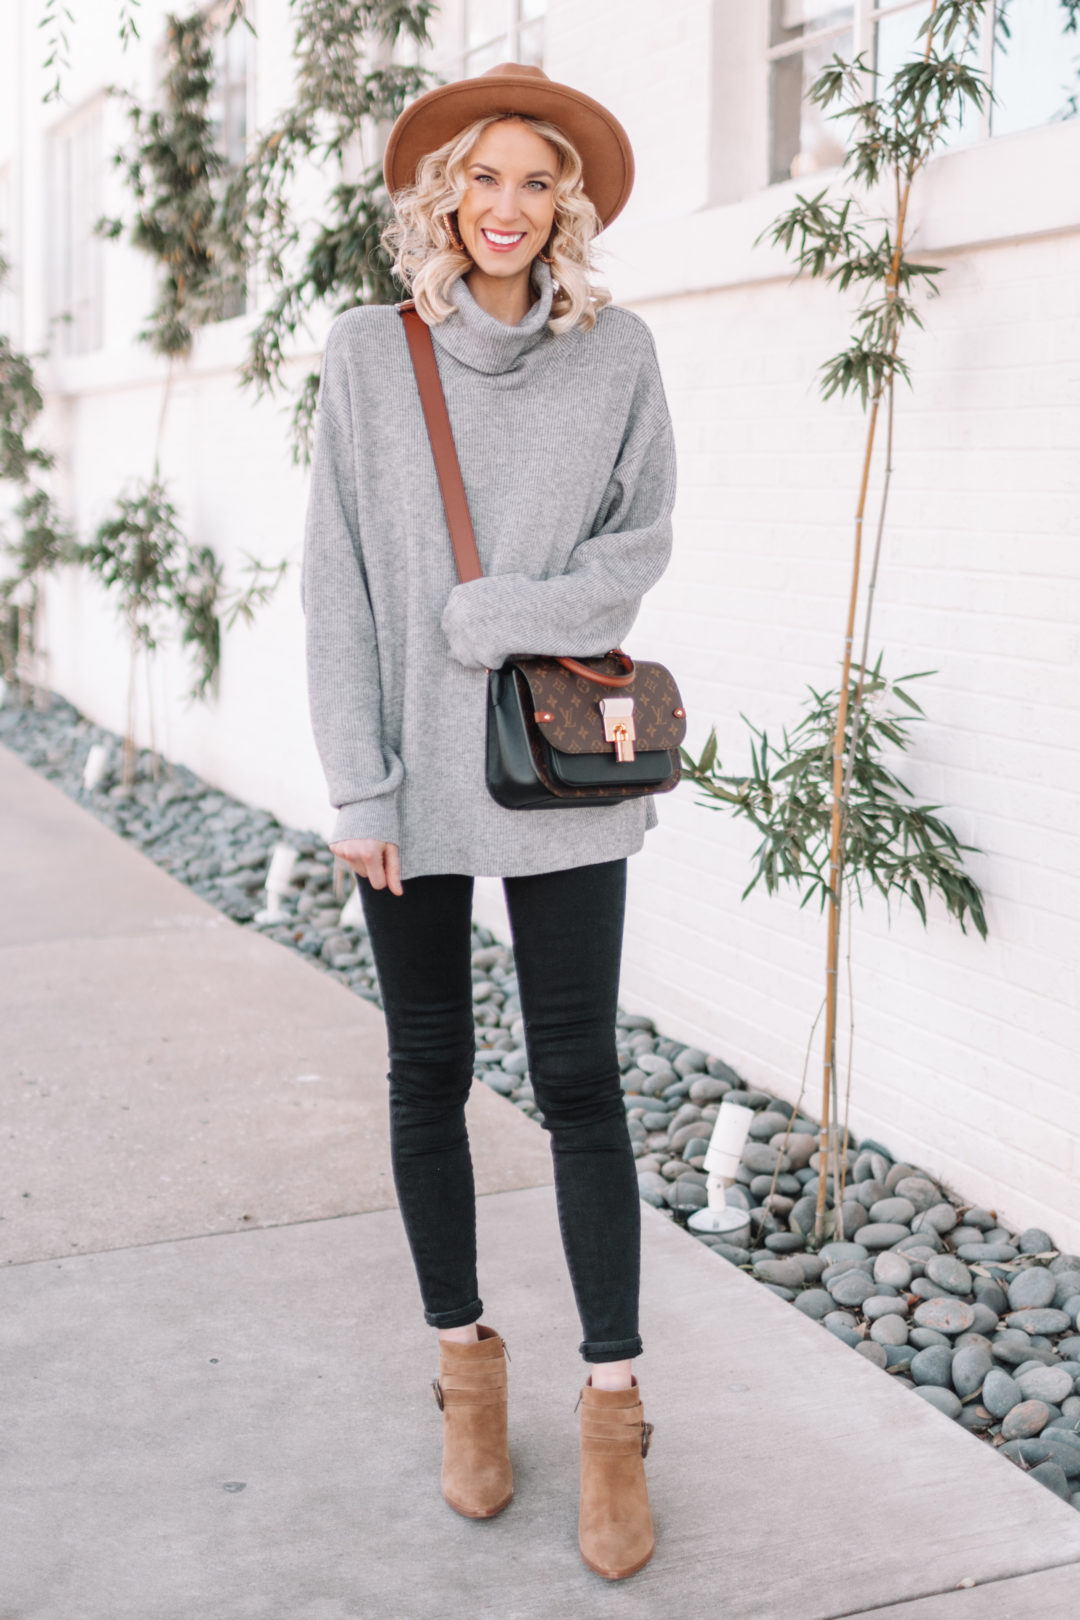 Oversized Sweater Outfit + Sale Boots - Straight A Style